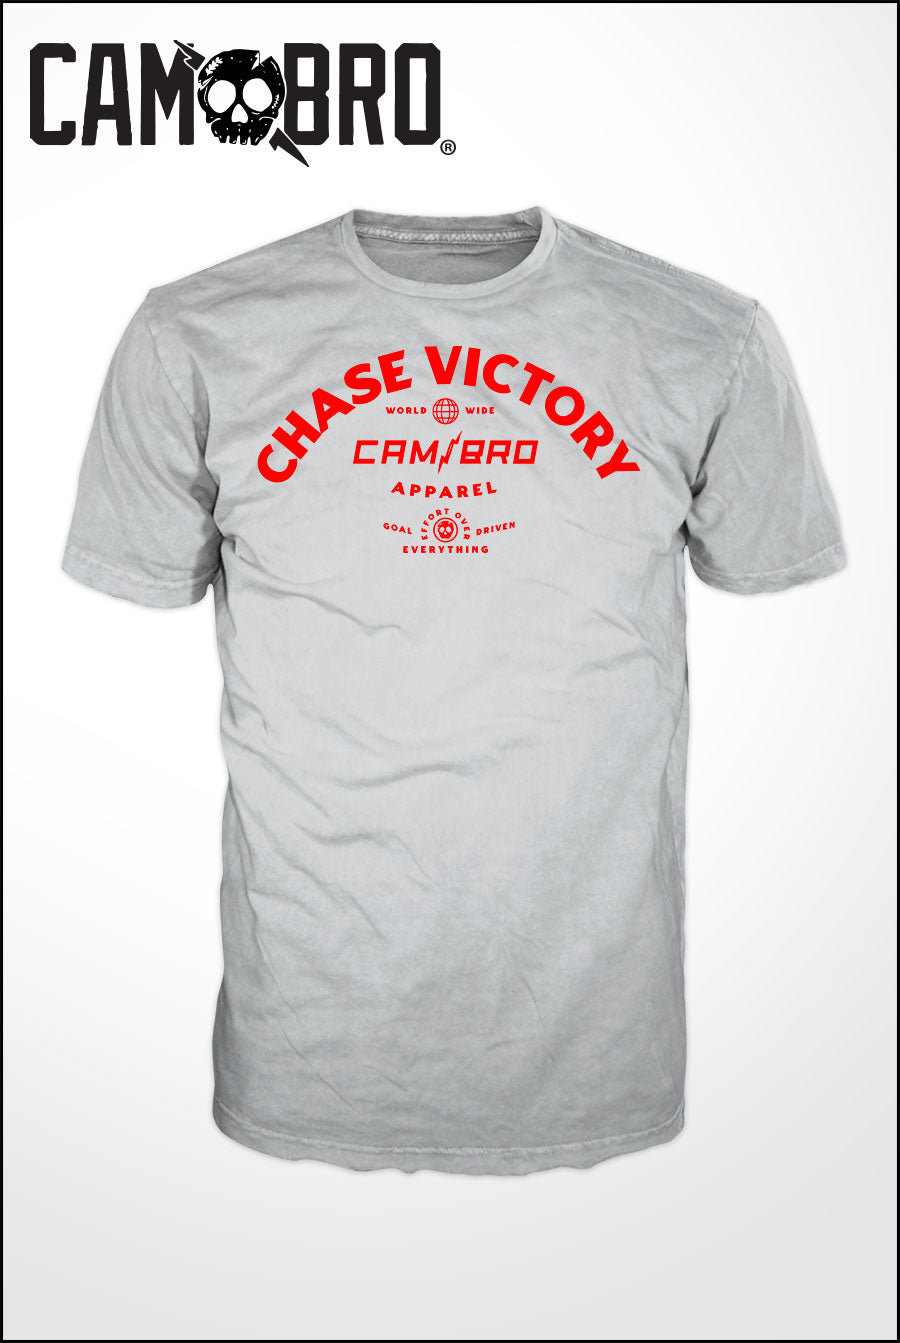 CHASE VICTORY Gray Unisex Tee